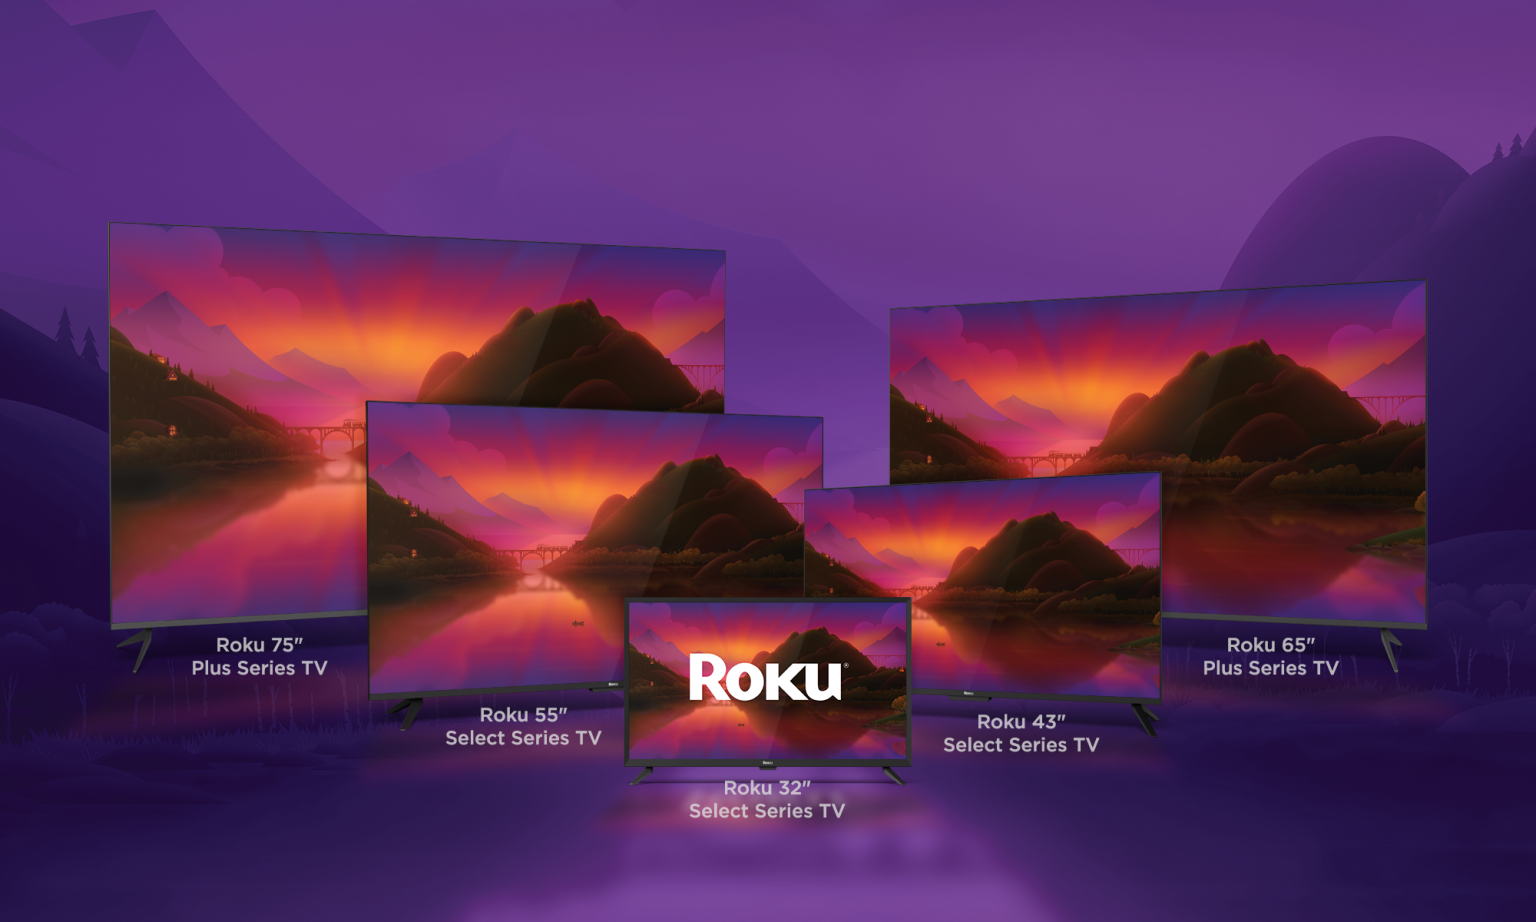 Roku unveils Select and Plus Series TVs Advanced Television